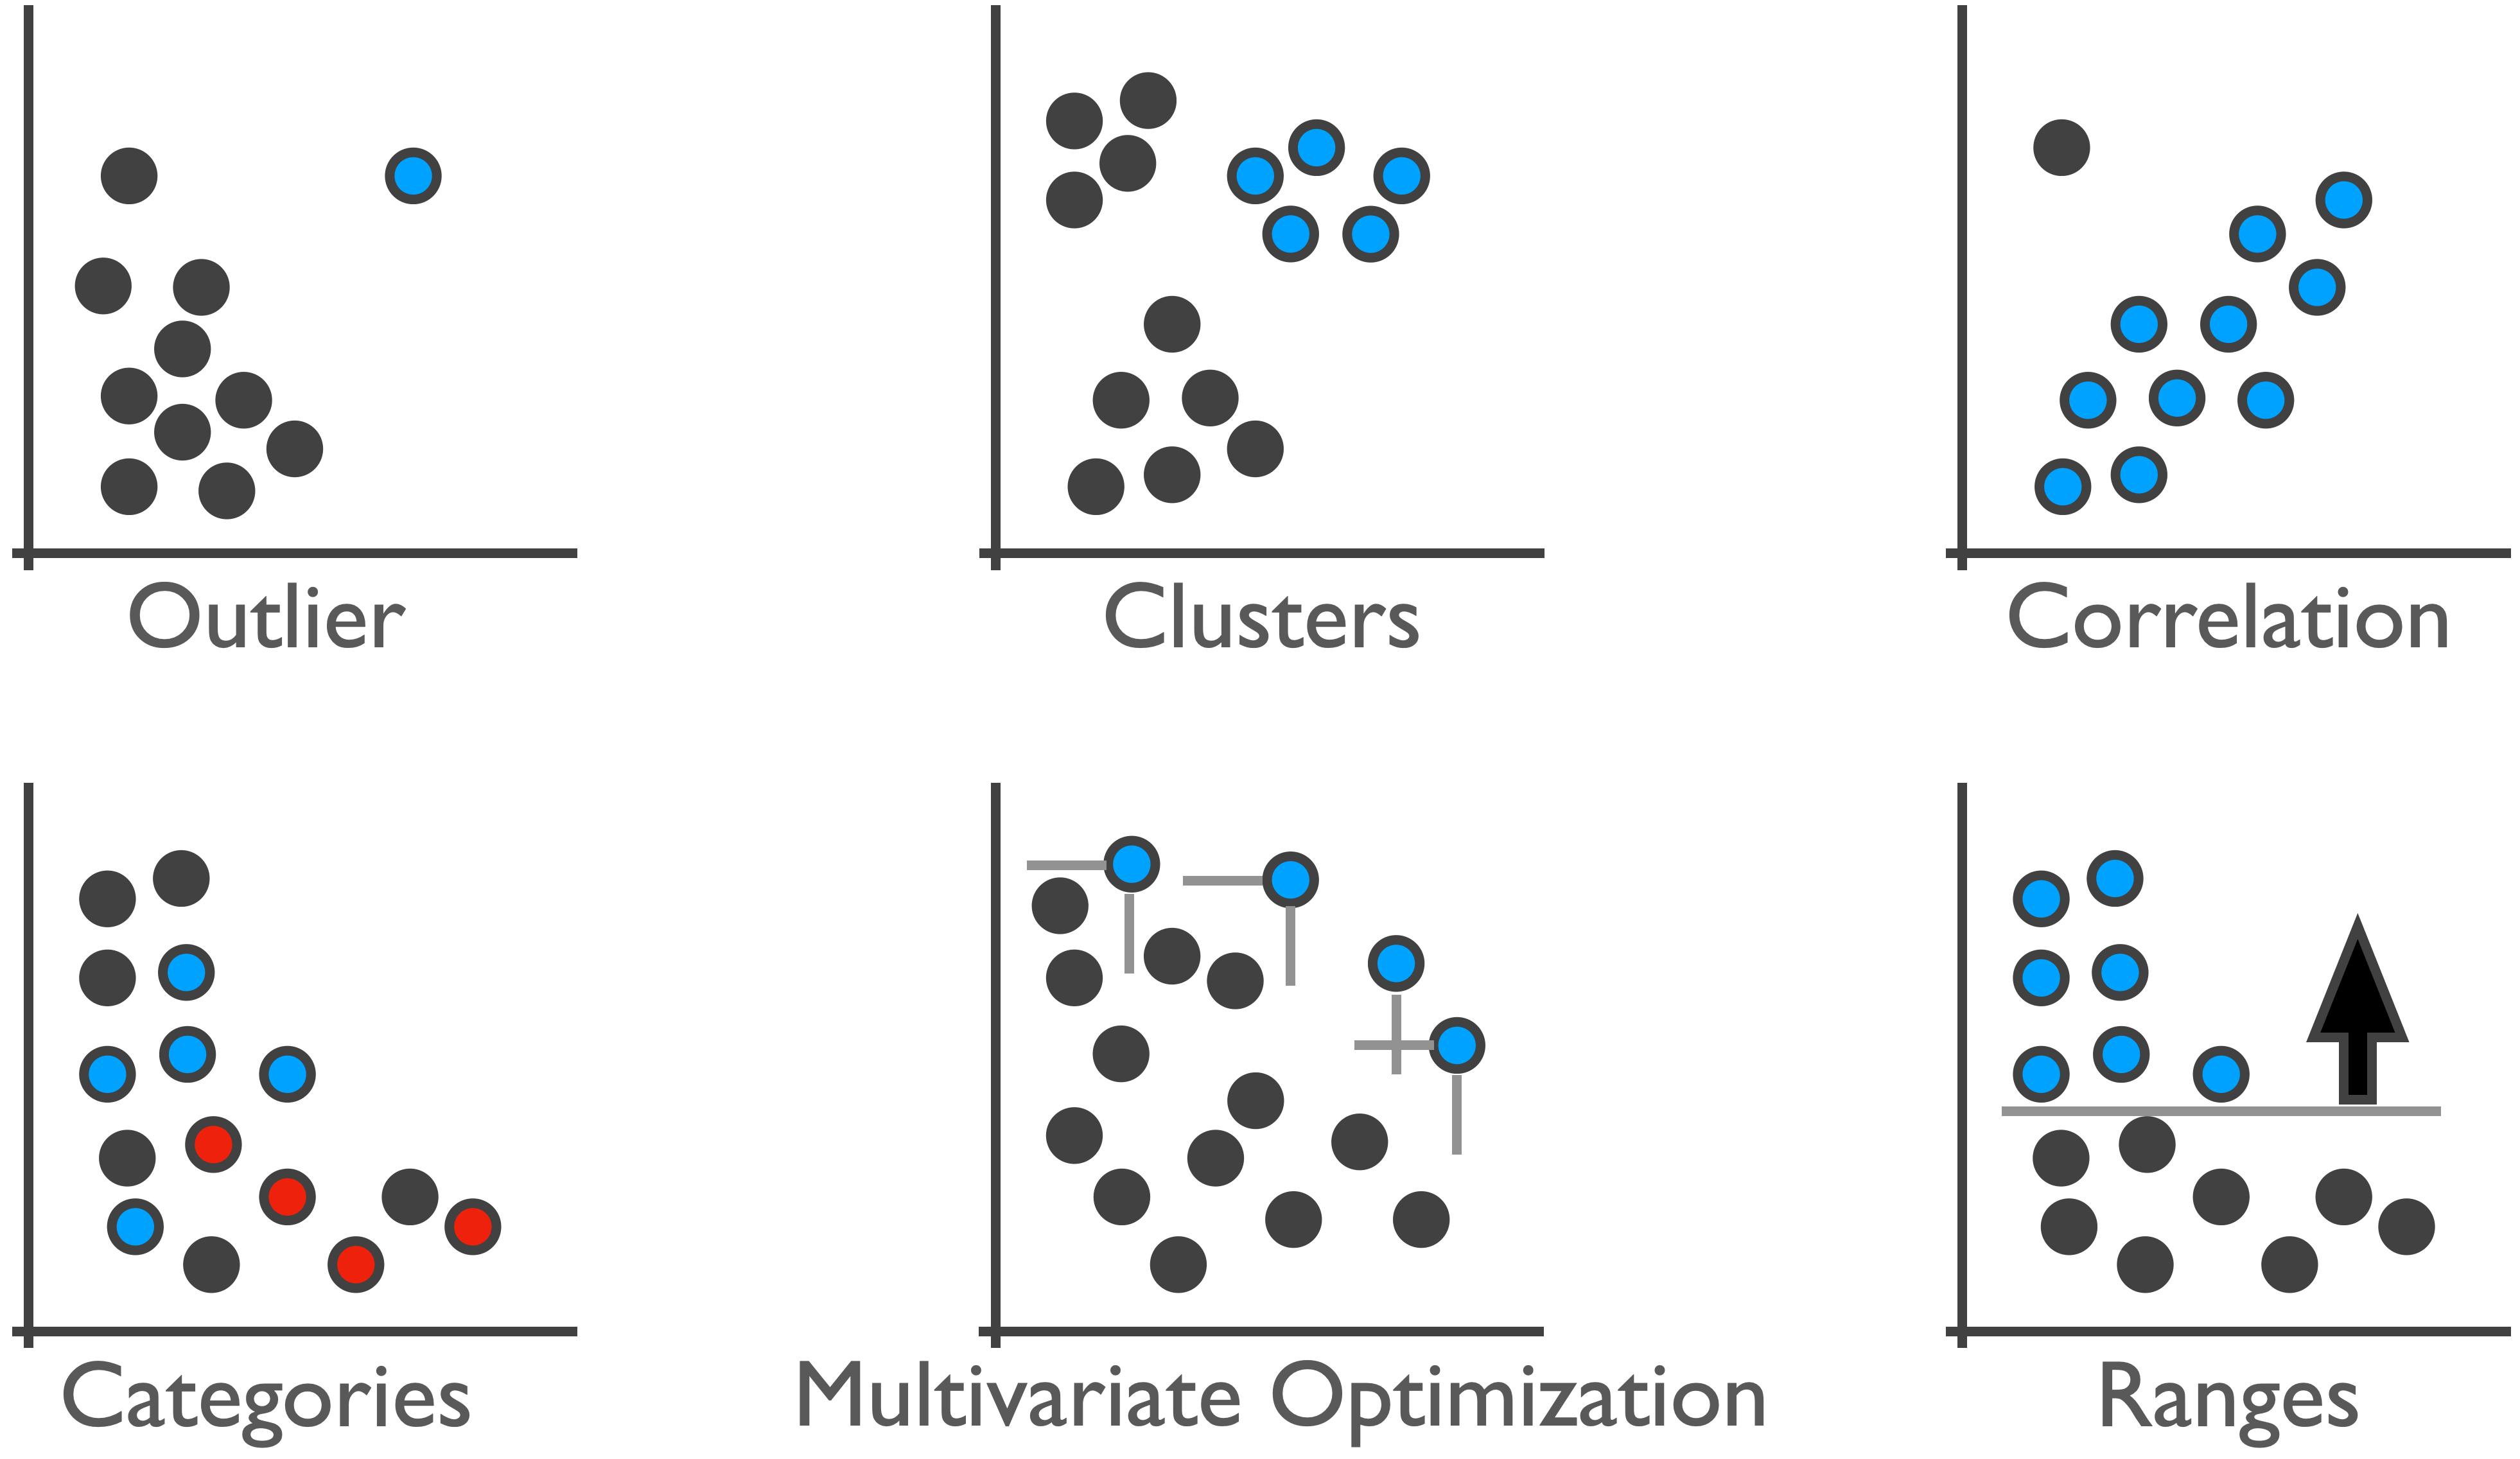 Six scatterplots arranged in a three-by-two grid showing different patterns found in scatterplots. The top row shows outliers, clusters, and correlations. The bottom row shows categories, multivariate optimization, and ranges.